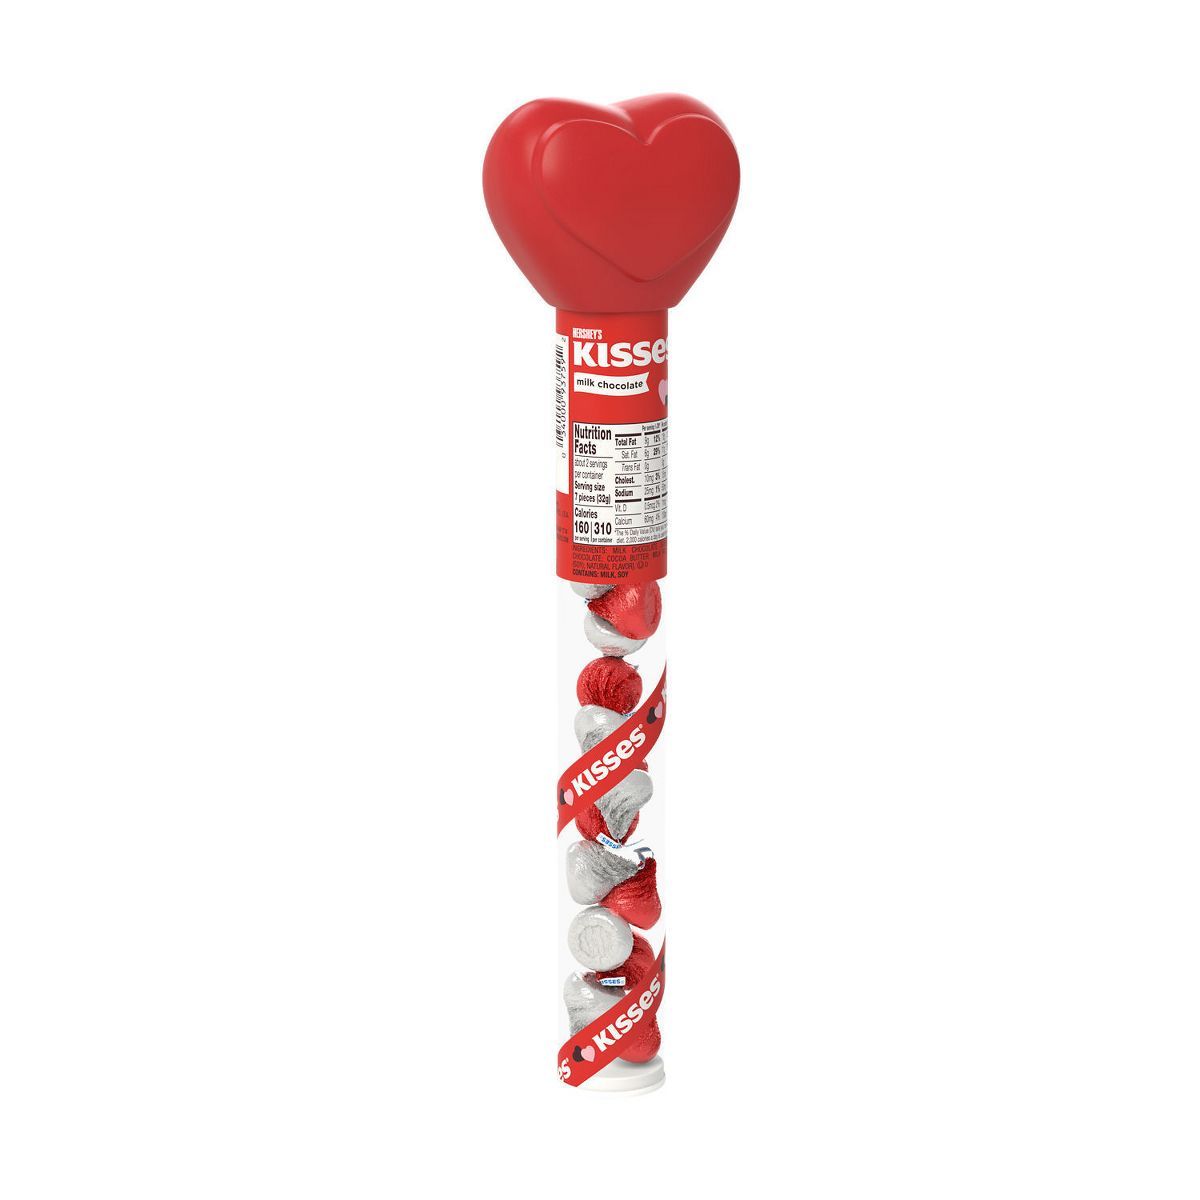 Hershey's Kisses Valentine's Day Milk Chocolate Hearts Candy Cane - 2.24oz | Target